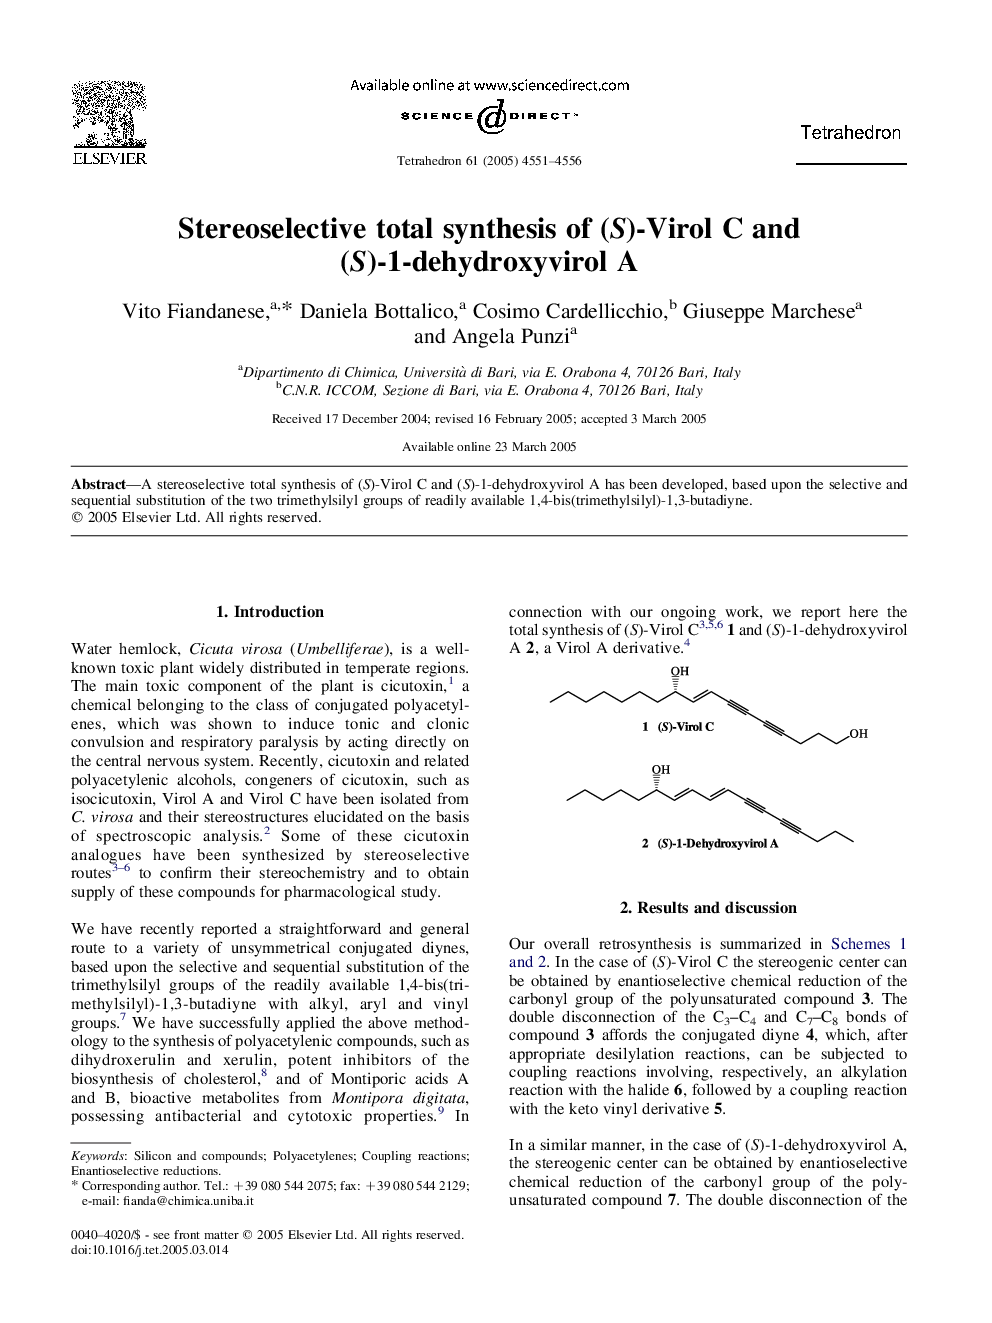 Stereoselective total synthesis of (S)-Virol C and (S)-1-dehydroxyvirol A